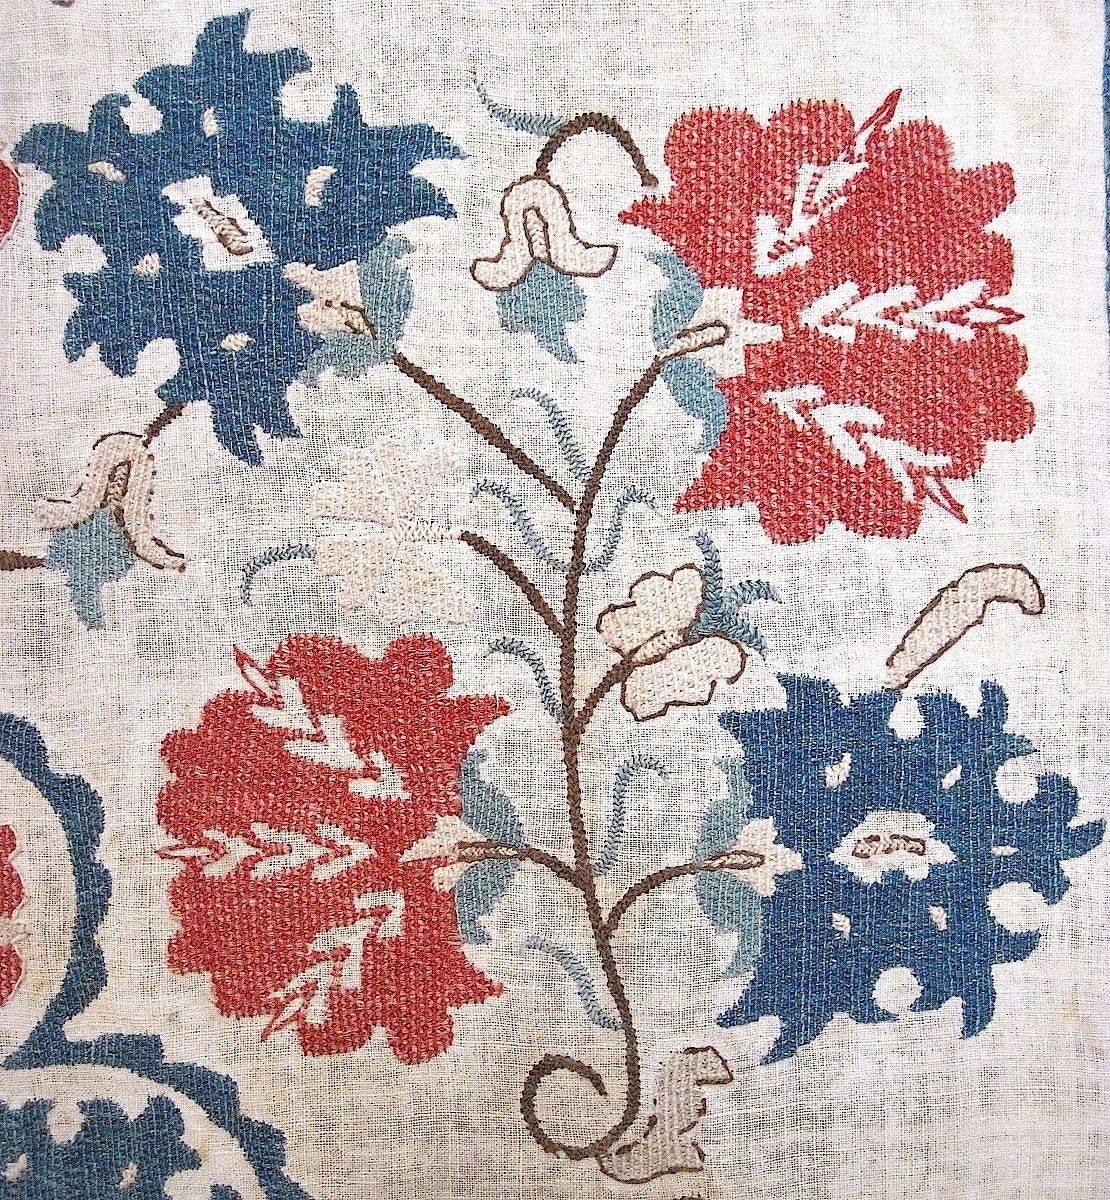 Other Ottoman Silk Embroidered Cover, 18th Century